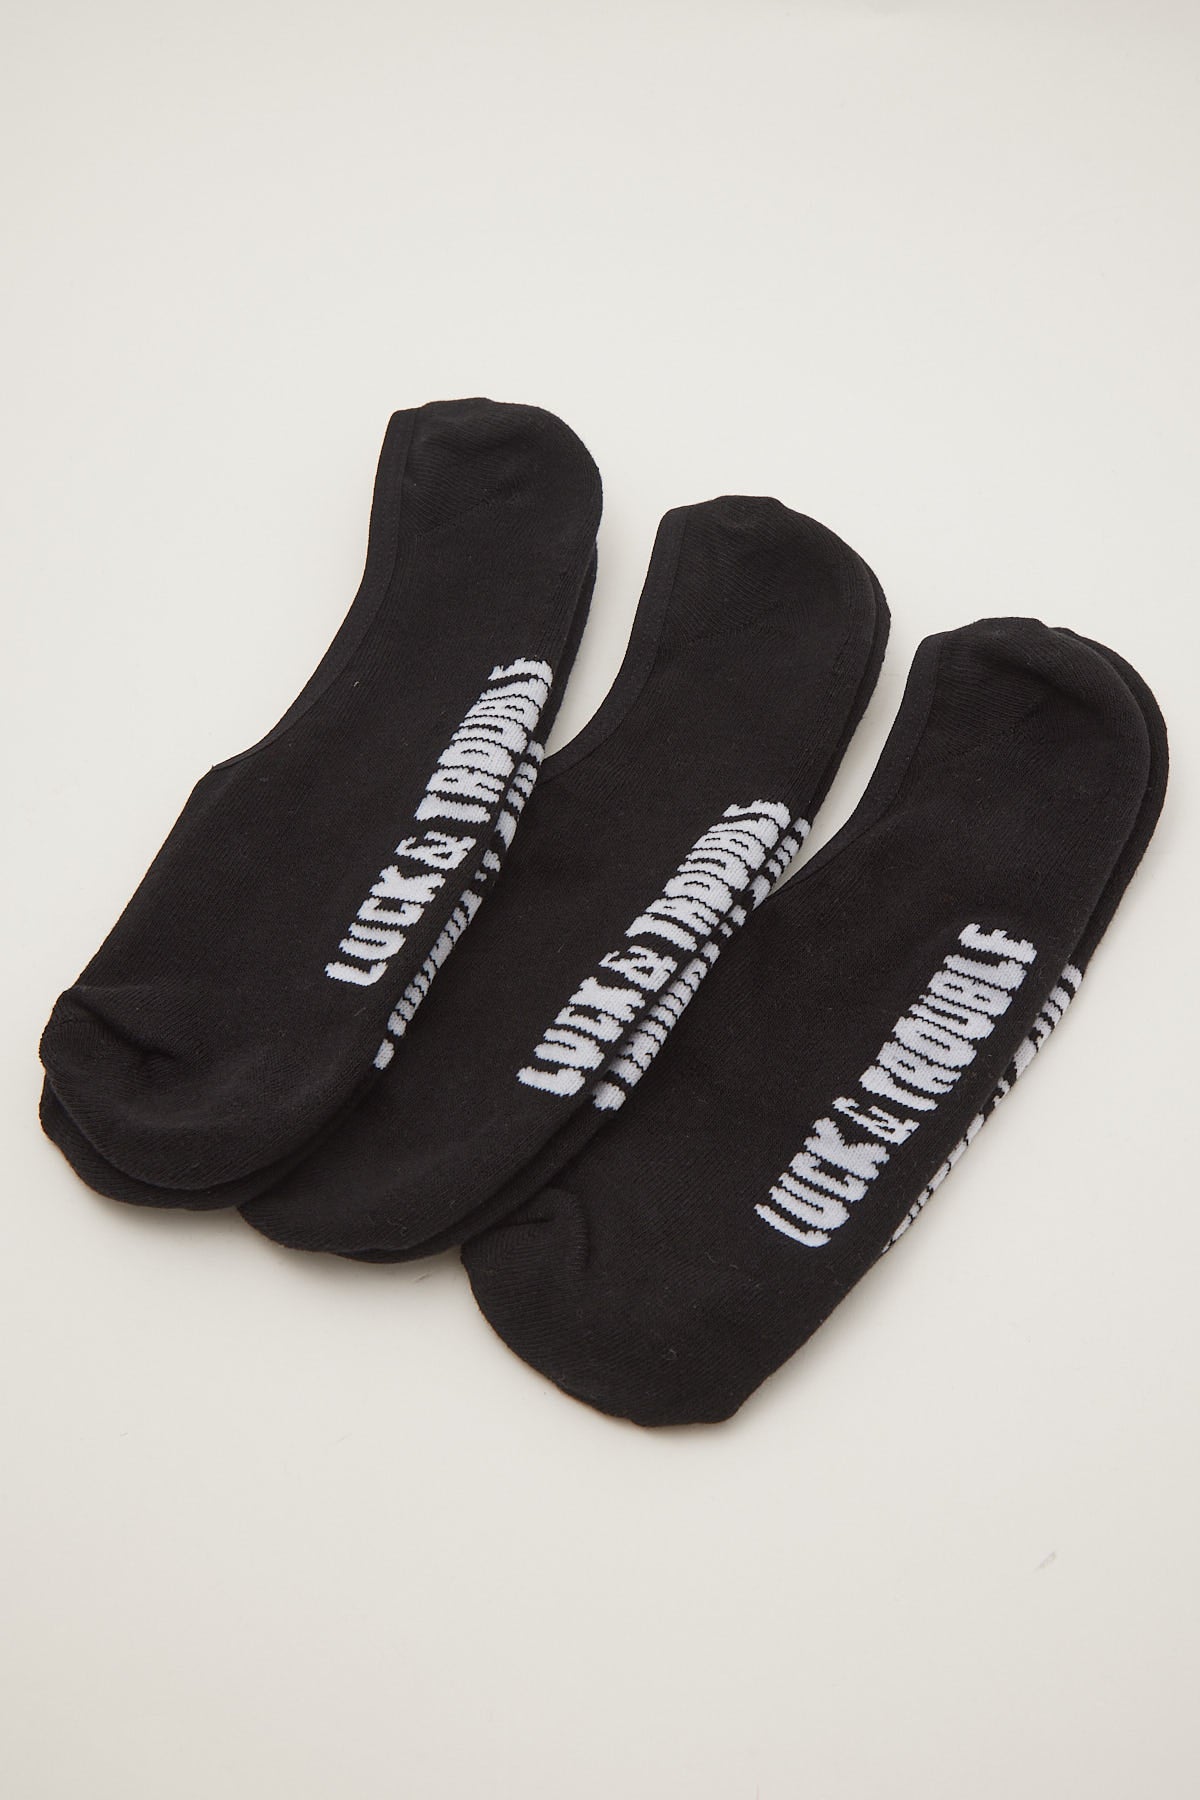 Luck & Trouble Cushion Sole No Show Sock 3 Pack Black